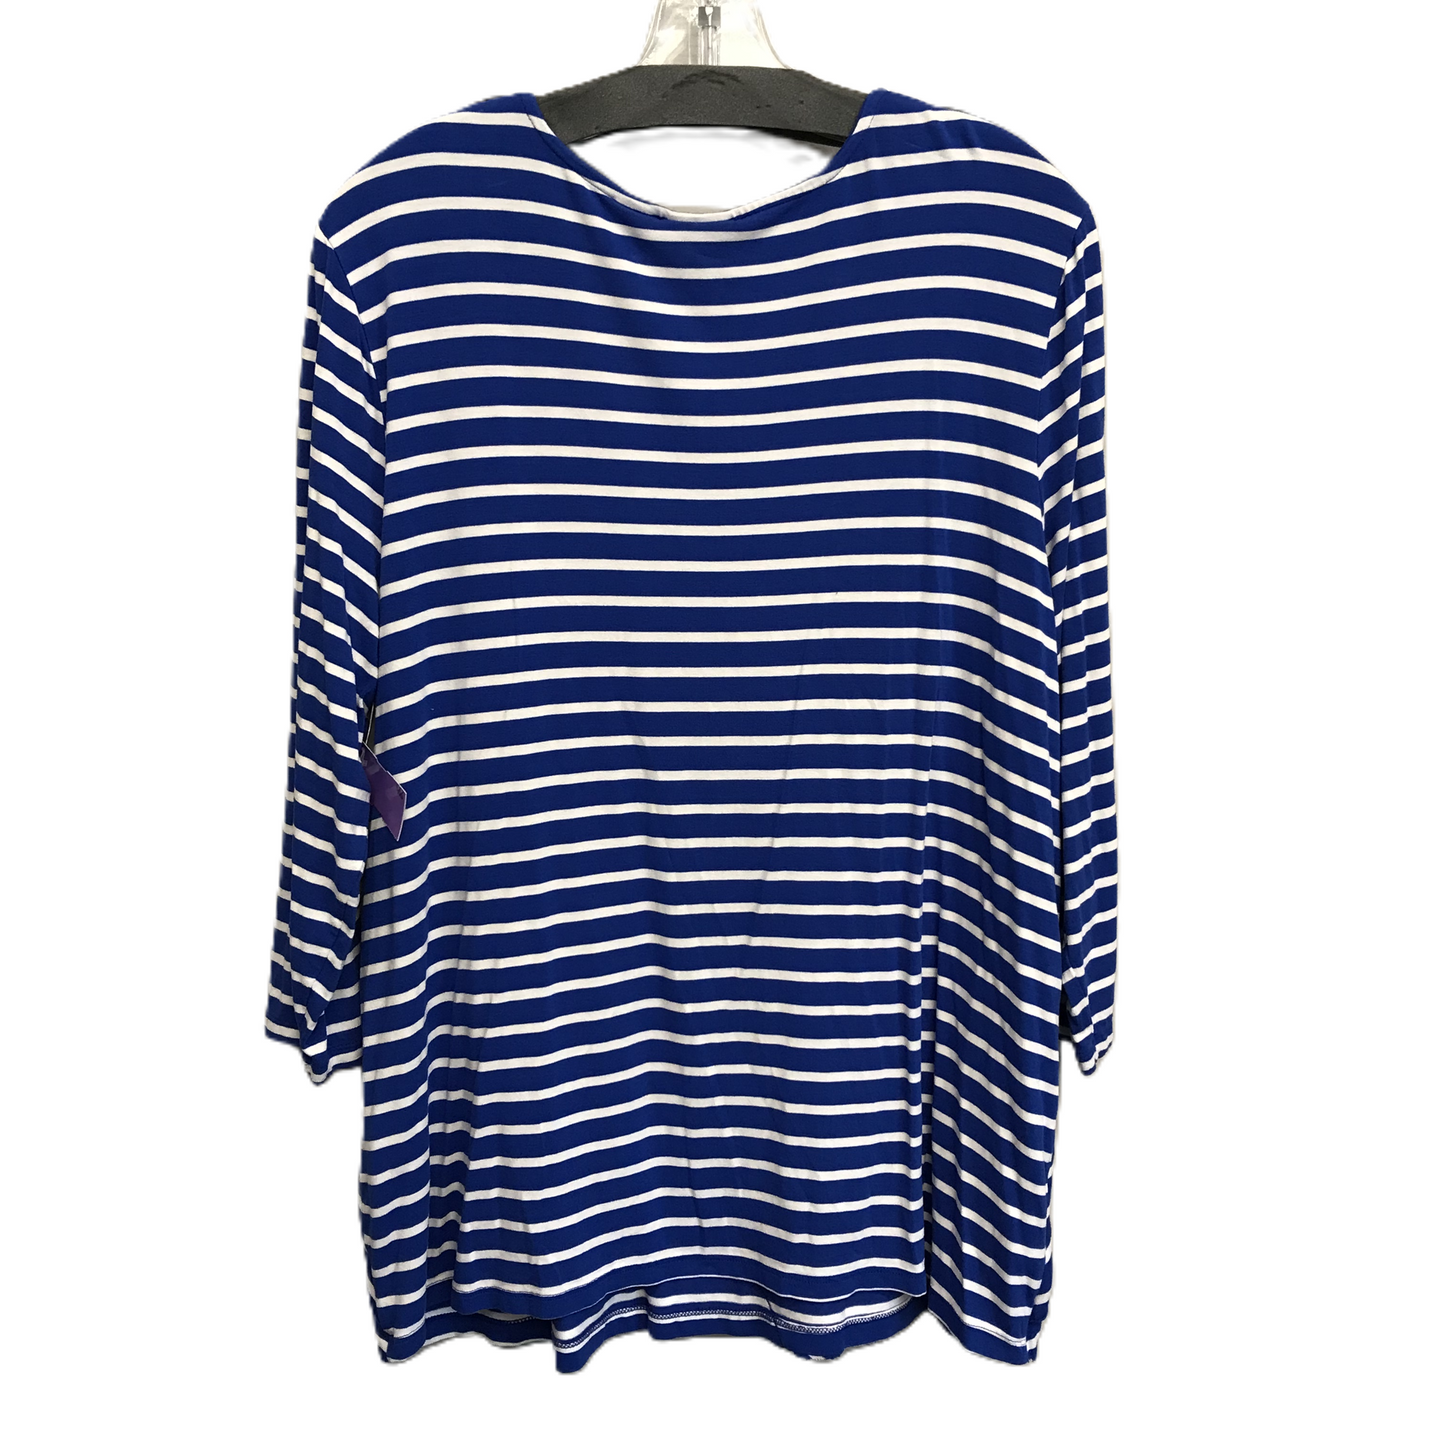 Striped Pattern Top Long Sleeve By Chicos, Size: Xl